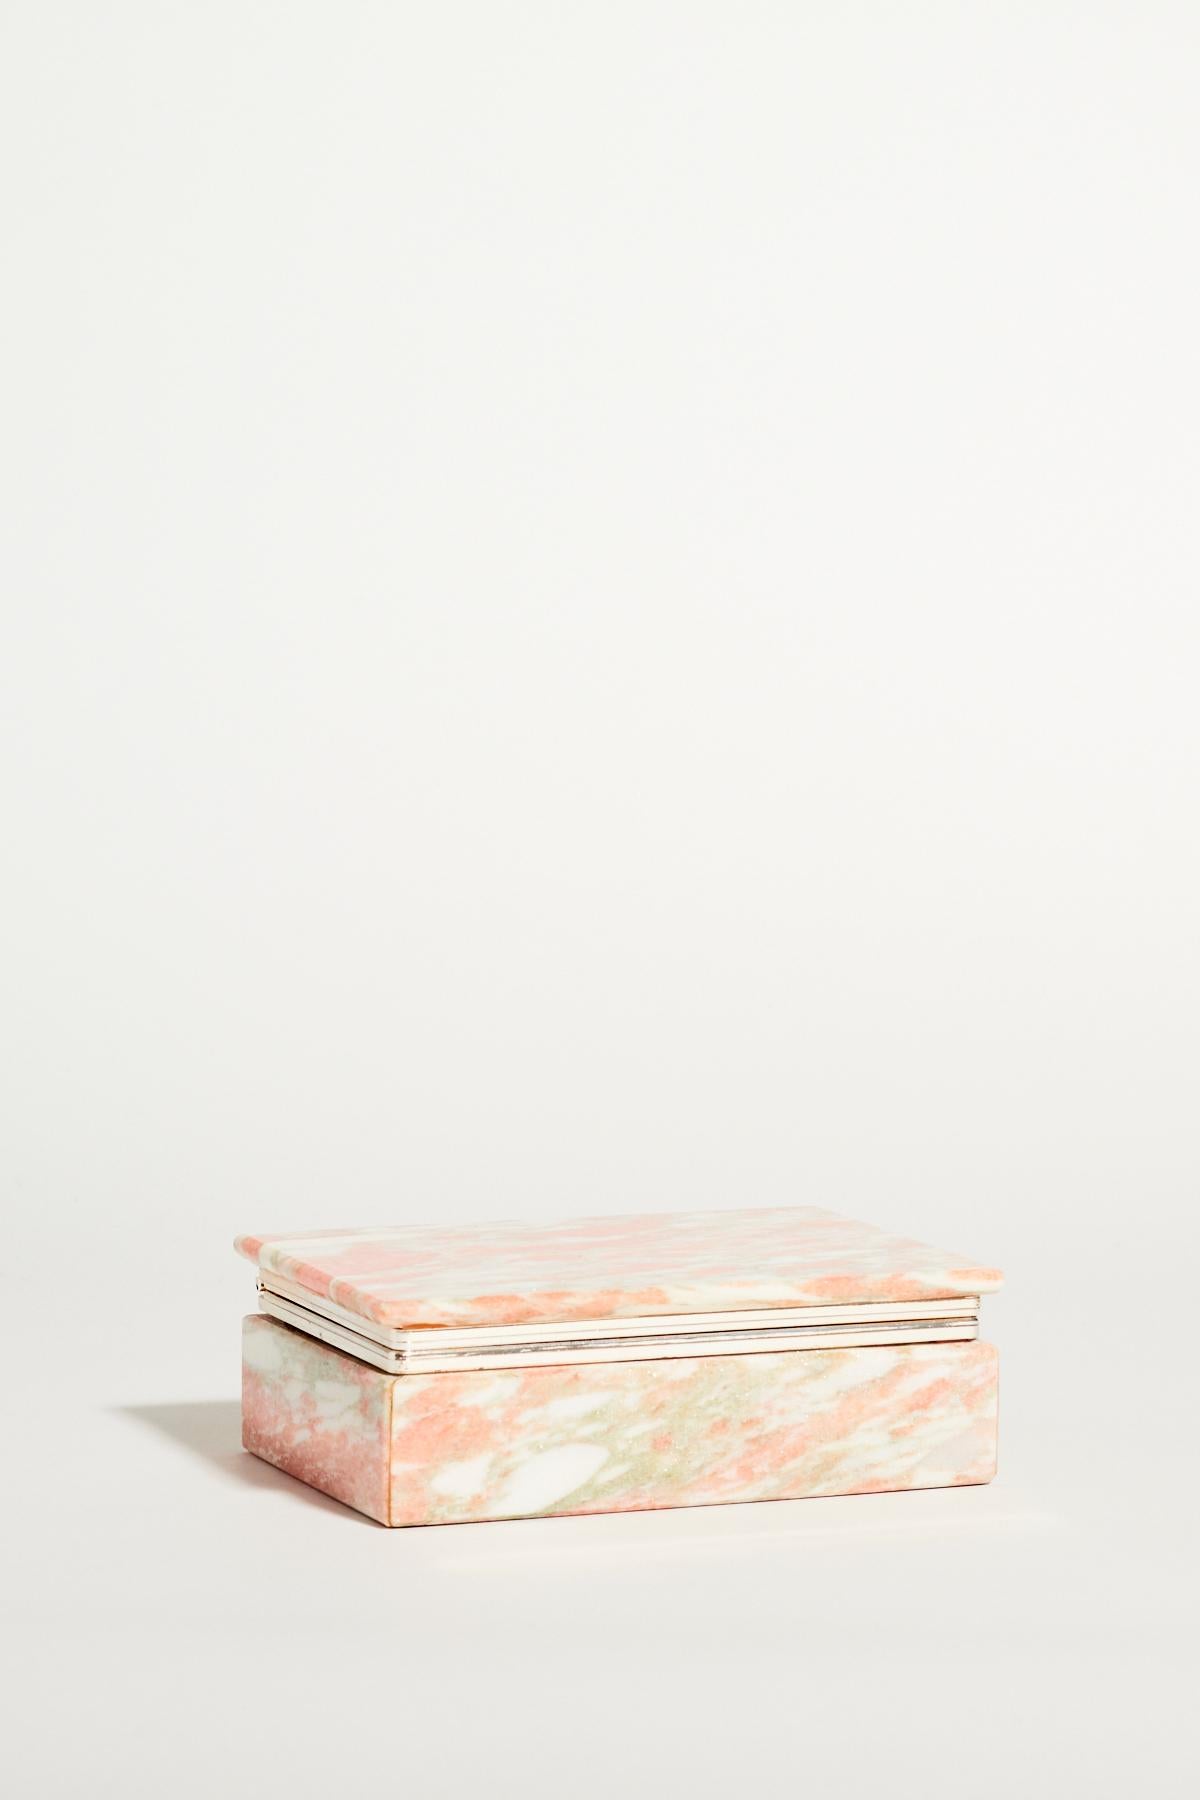 Pink, gray and white marble jewelry box with hinged lid and brass trim.